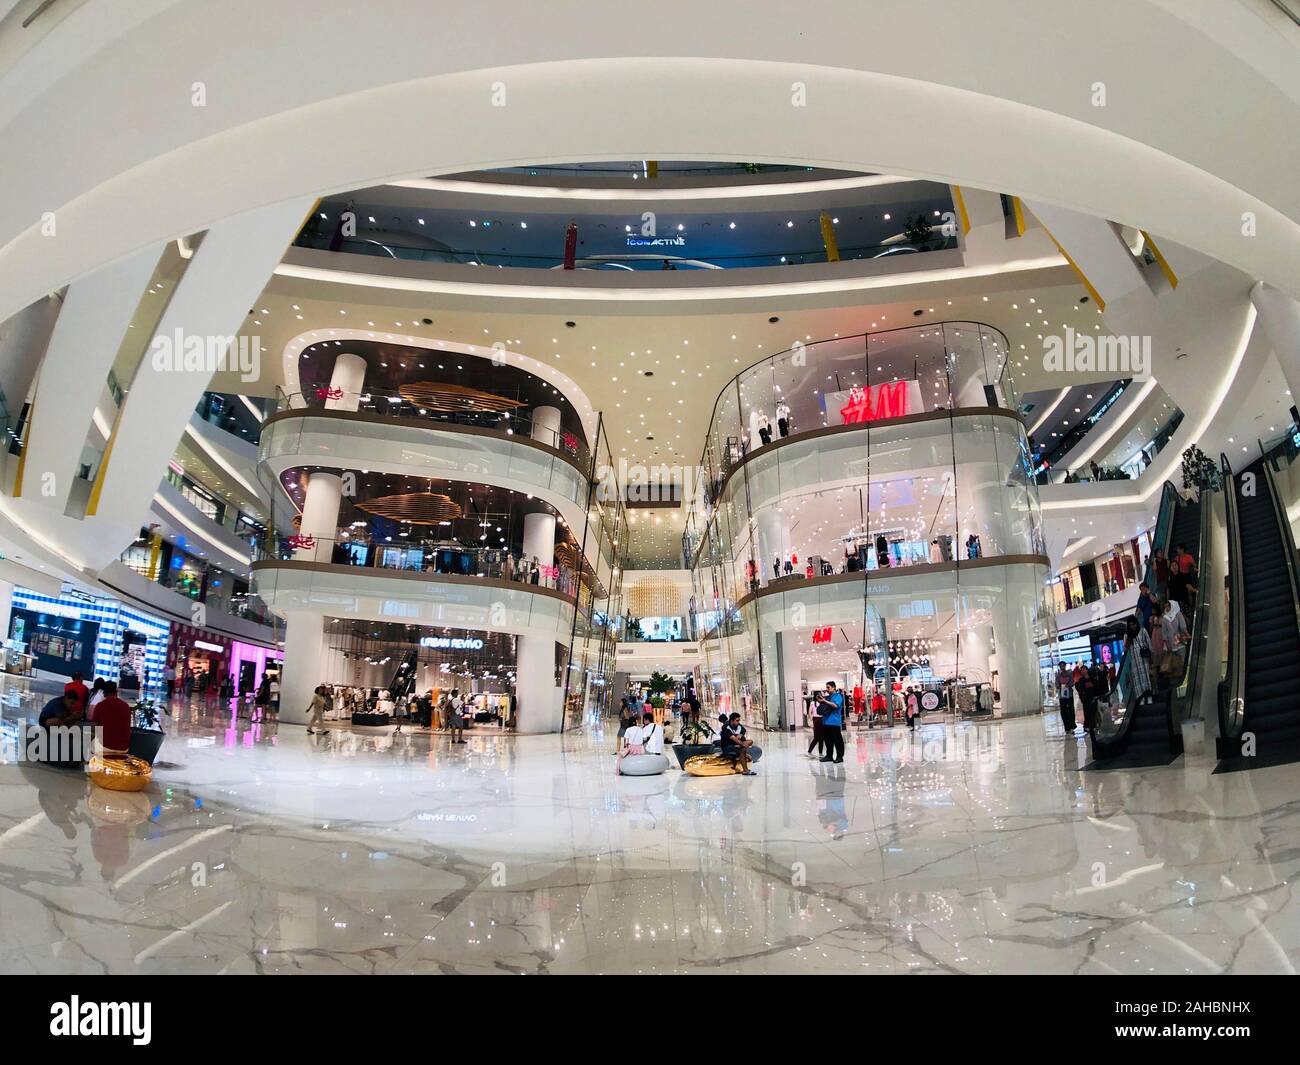 15 Beautiful Ceiling Icon Siam Mall Images, Stock Photos, 3D objects, &  Vectors